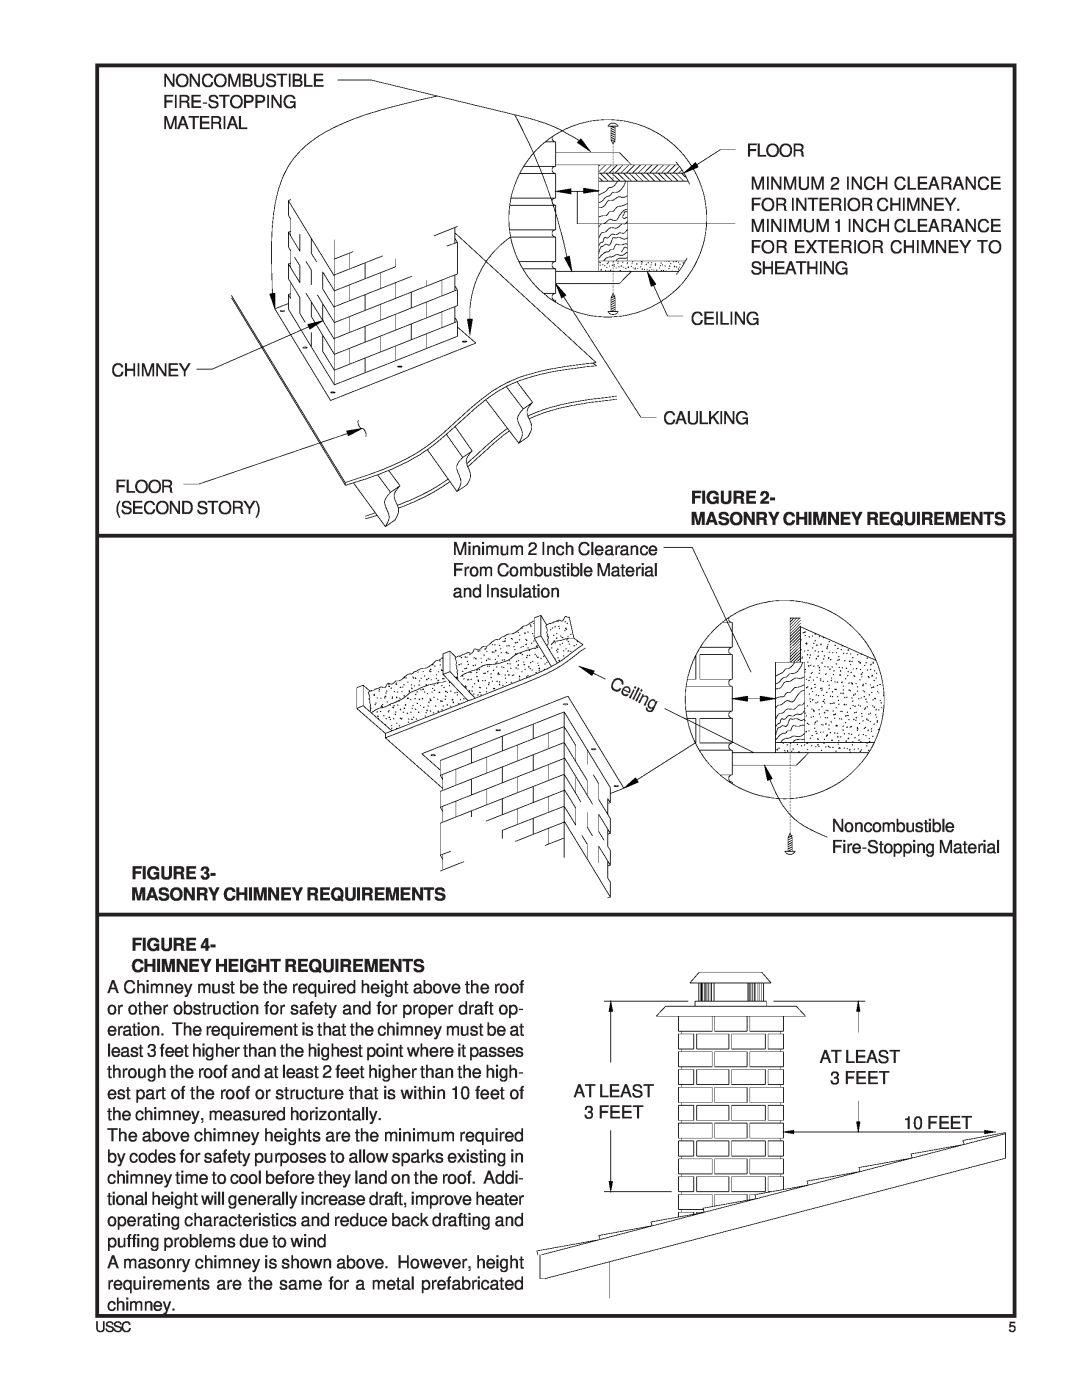 United States Stove 4027, ASA7 owner manual Figure Masonry Chimney Requirements, Figure Chimney Height Requirements 